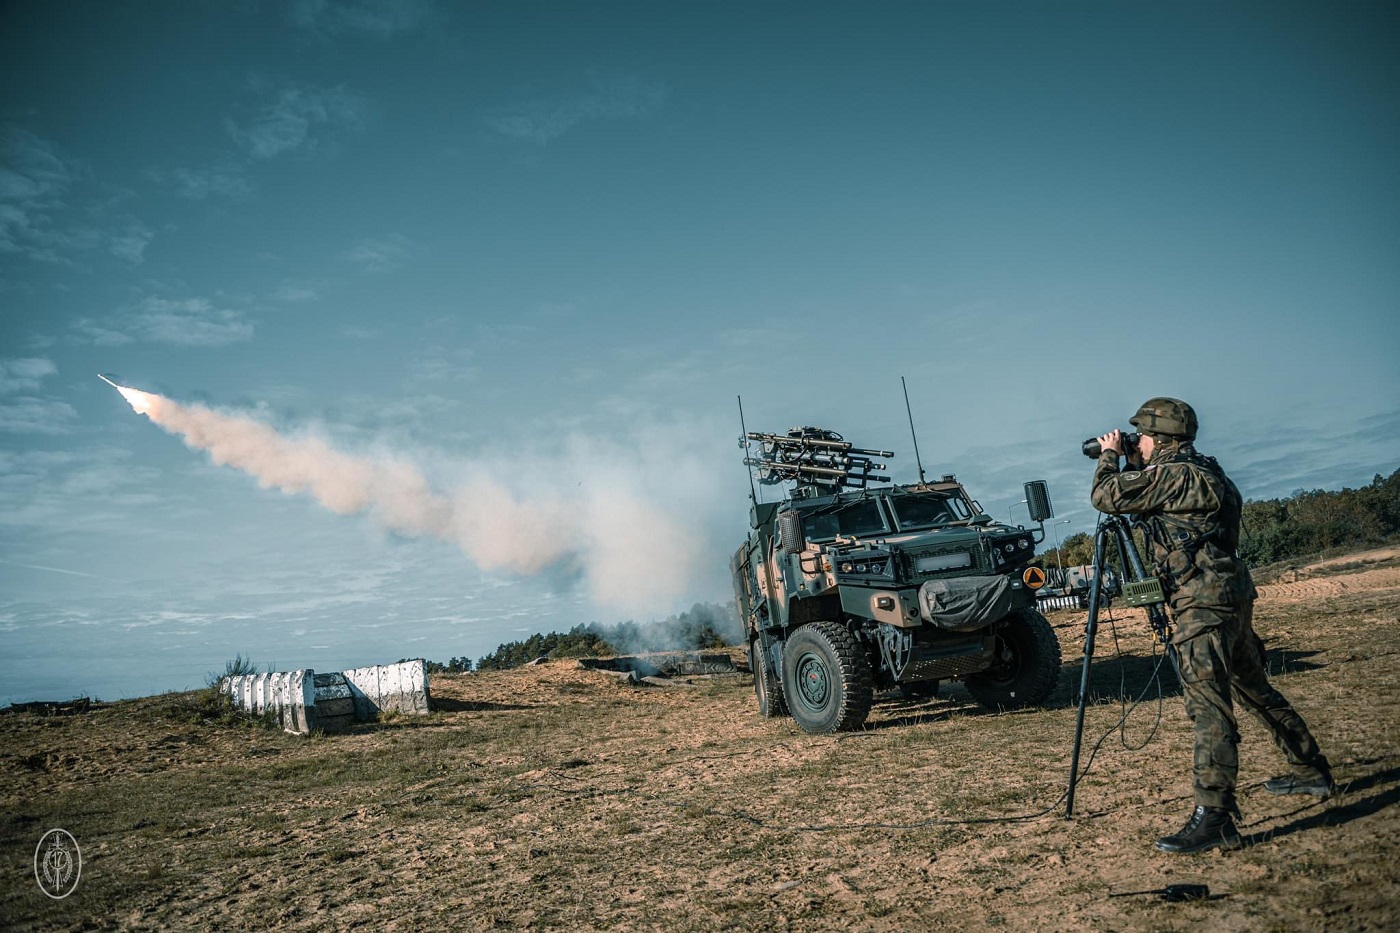 Polish Land Forces Conduct Successful Firing Exercises with Poprad Missile System